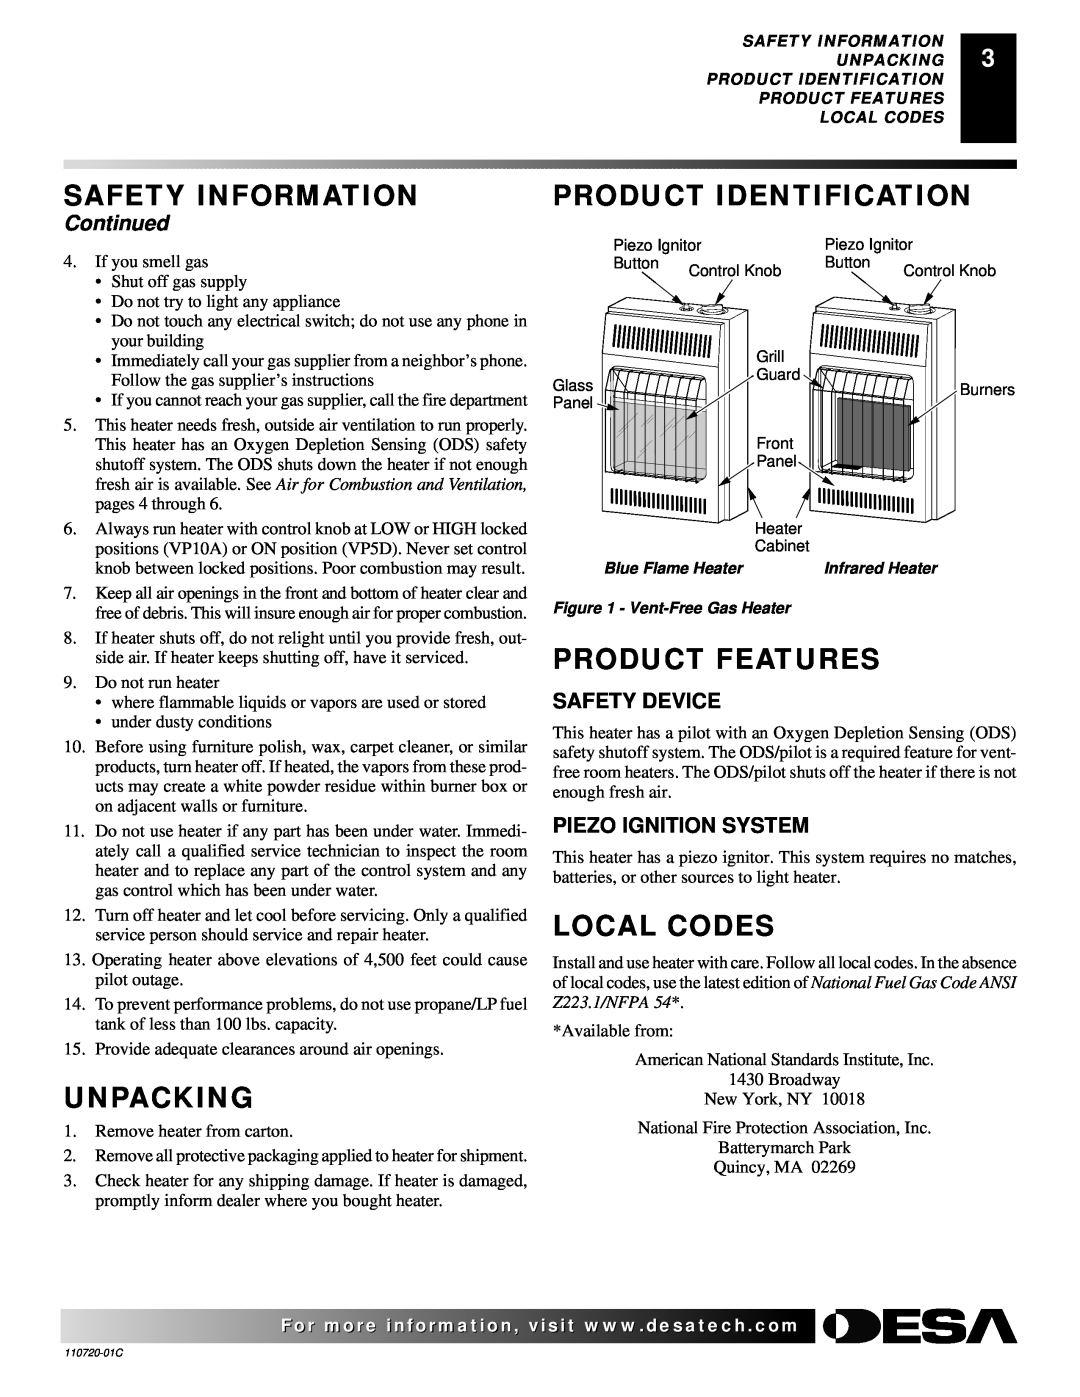 Desa VN10A Unpacking, Product Identification, Product Features, Local Codes, Continued, Safety Device, Safety Information 